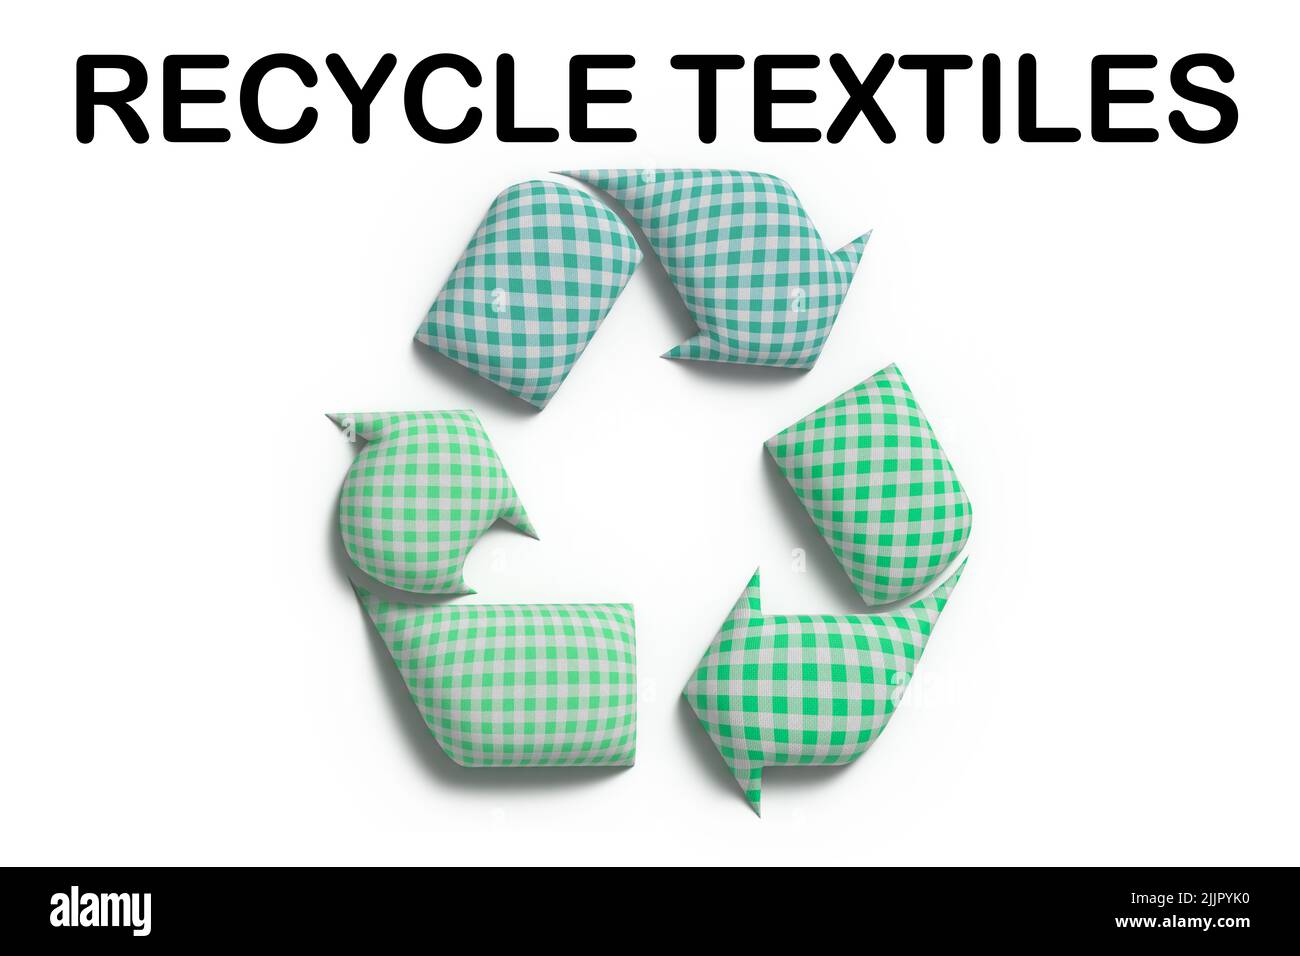 Recycle textiles, recycle symbol make with recycled fabric, reduce textile waste and promote sustainable fashion Stock Photo